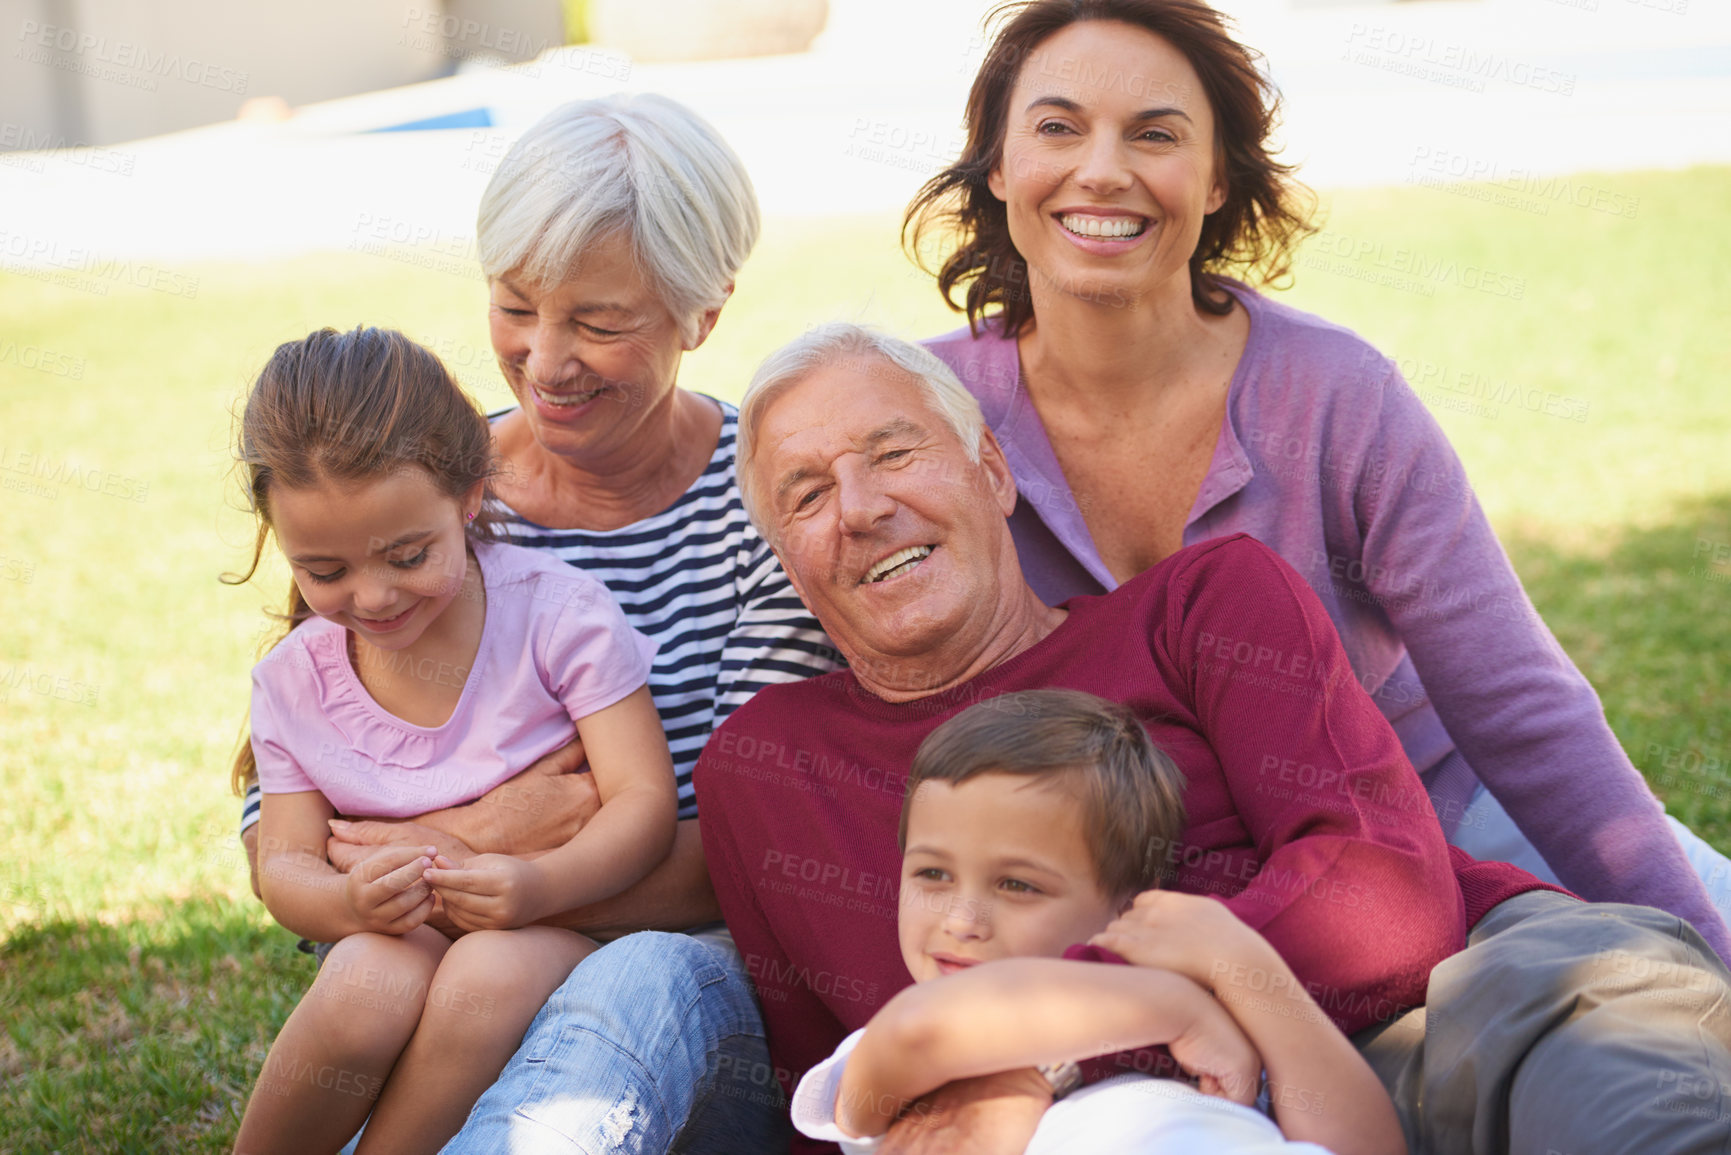 Buy stock photo Cropped shot of a multi-generational family spending time together outside